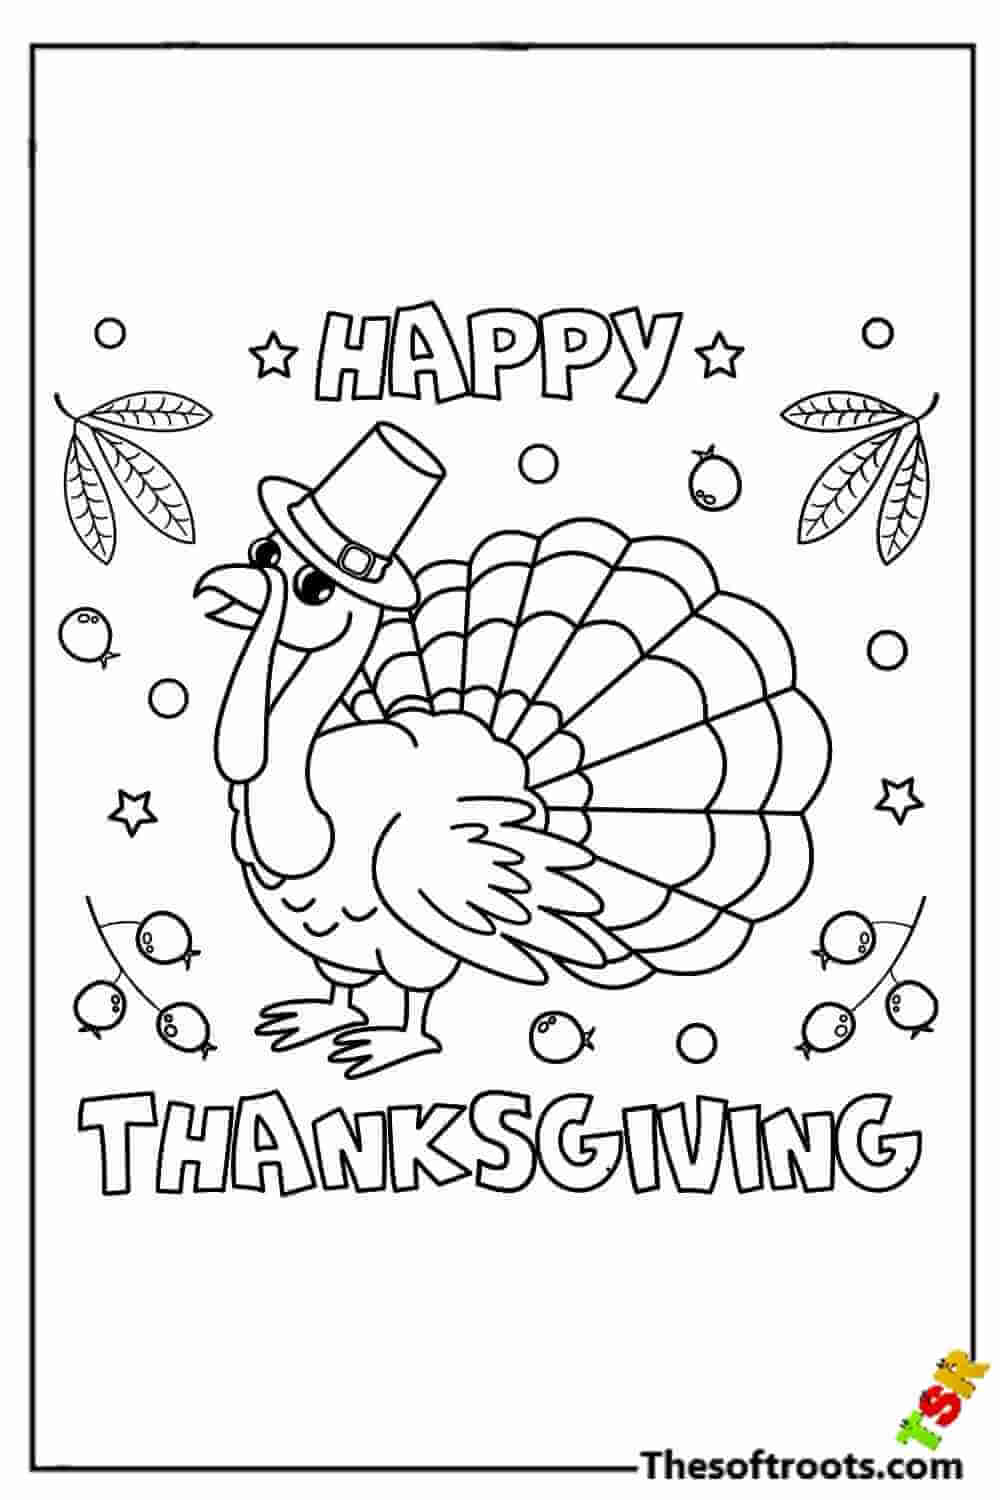 Turkey in leaves coloring pages